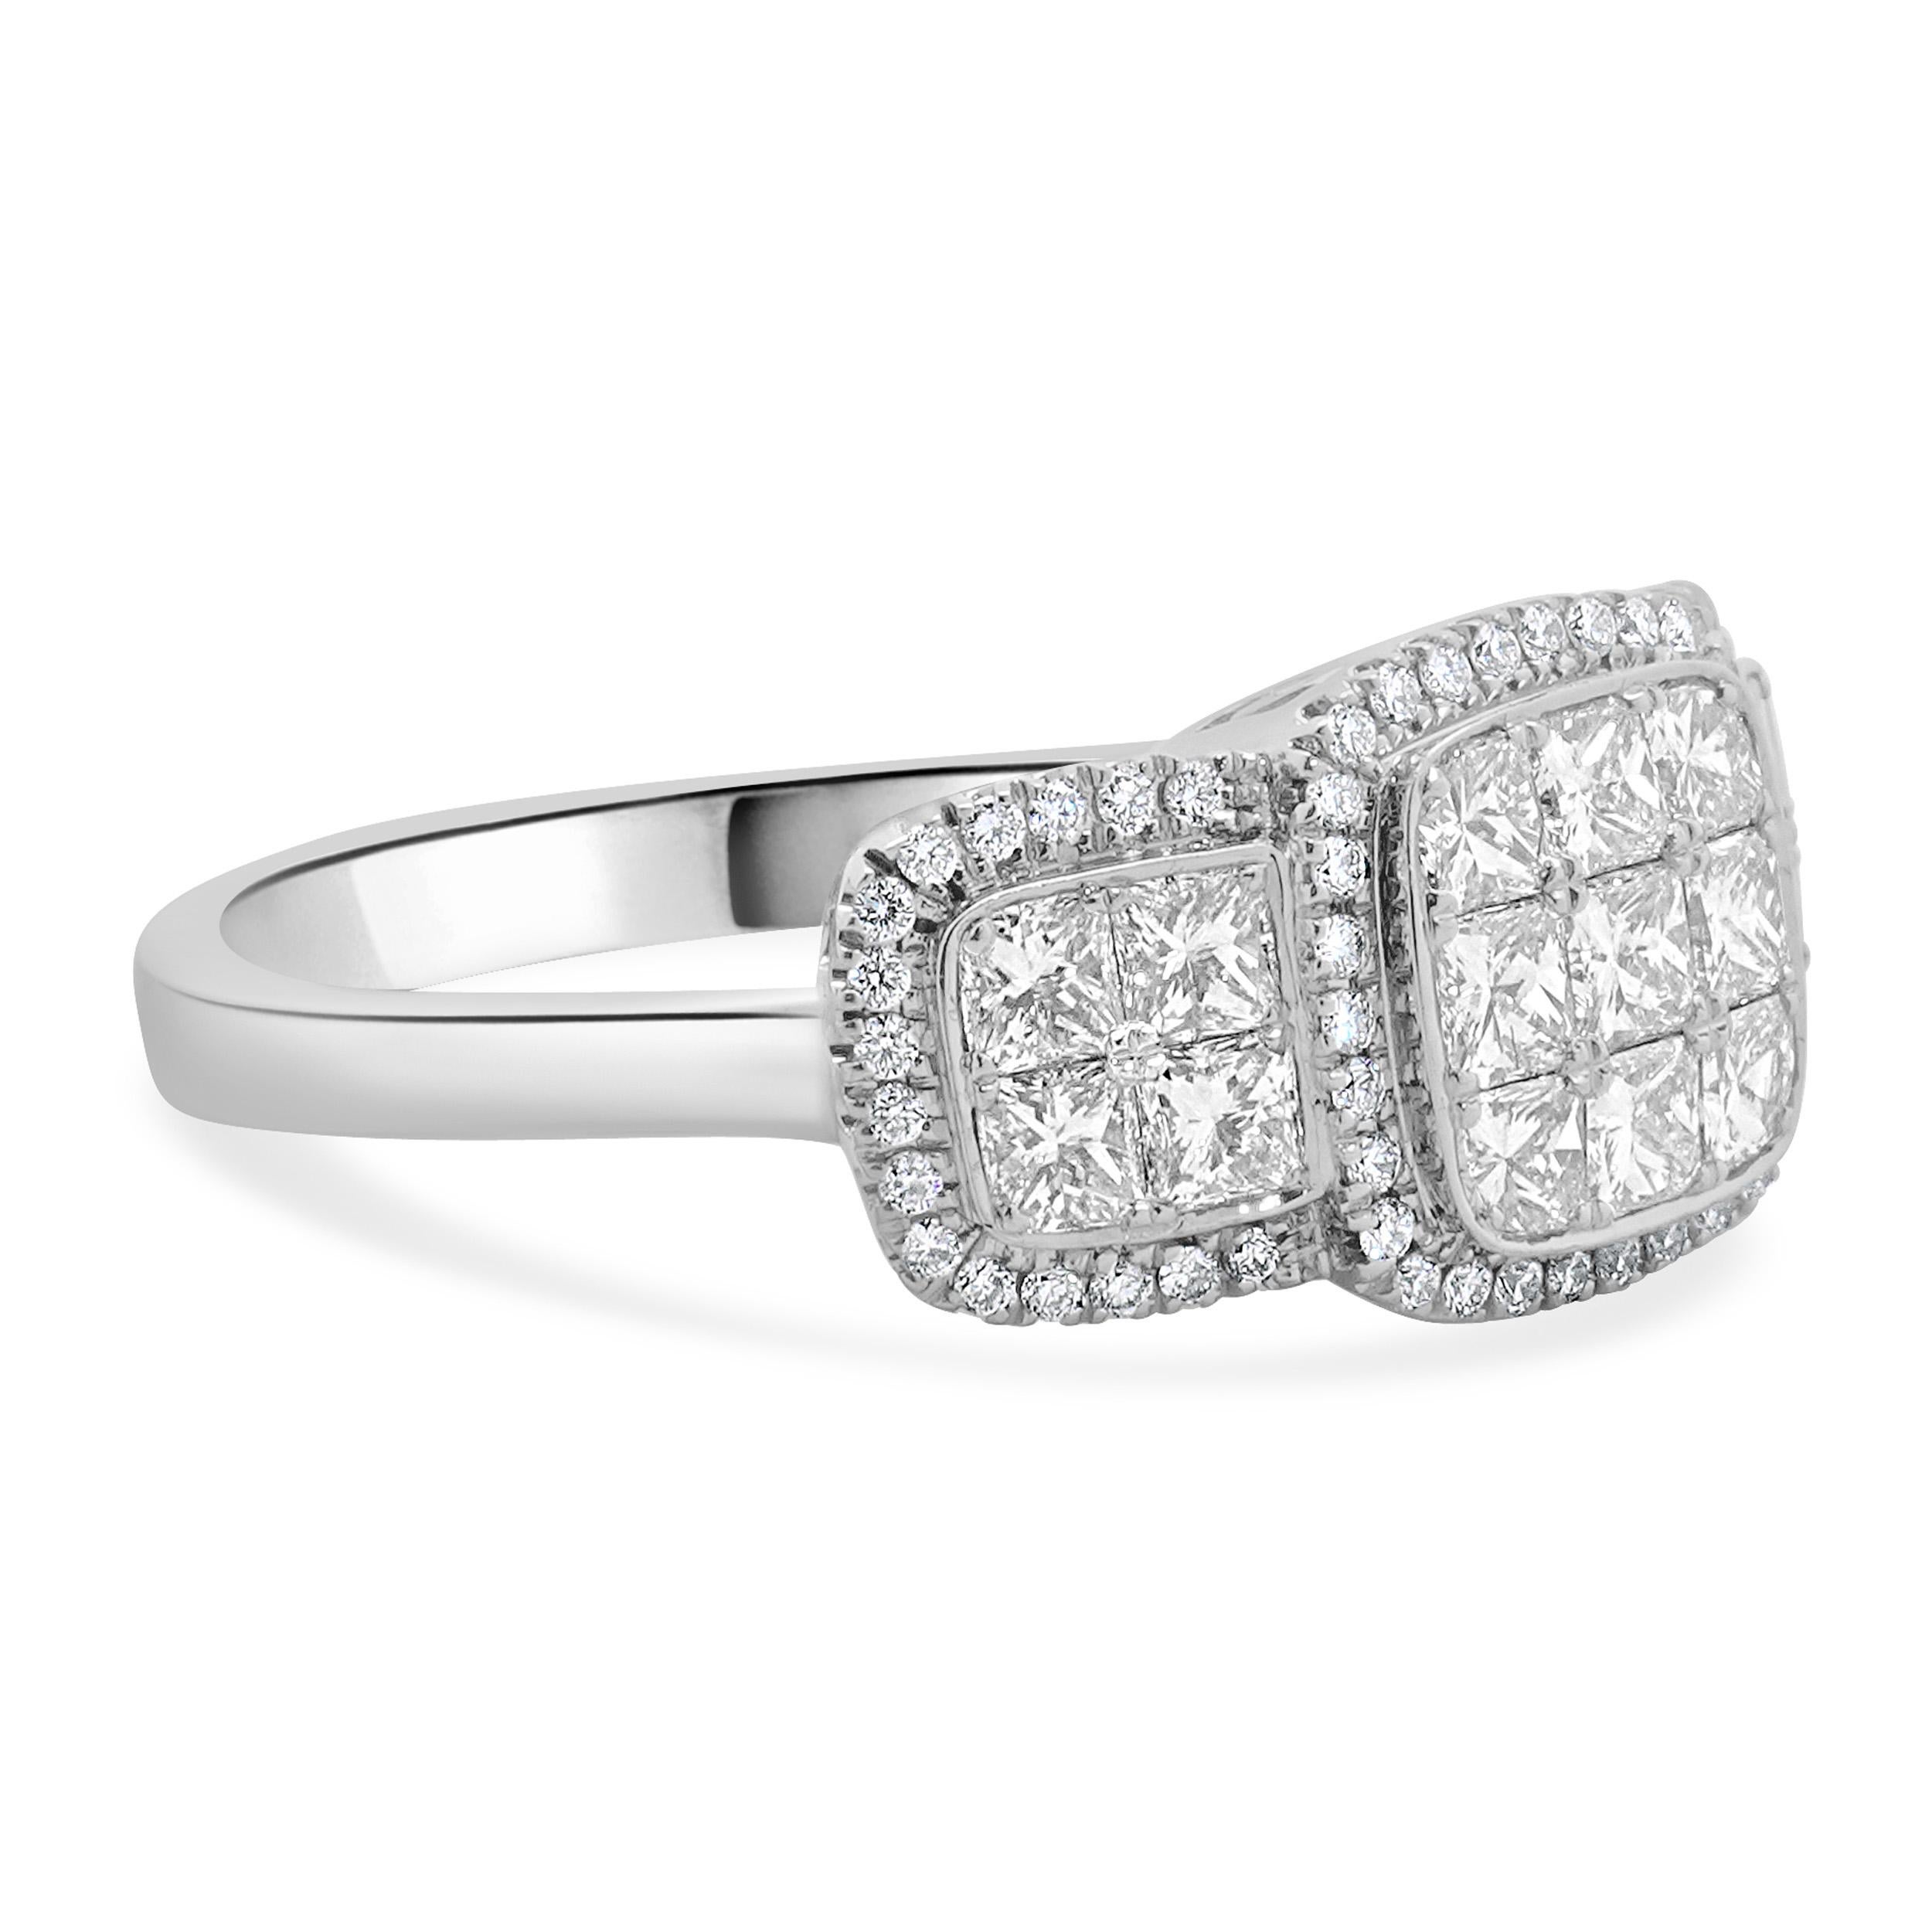 18 Karat White Gold Pave Diamond Engagement Ring In Excellent Condition For Sale In Scottsdale, AZ